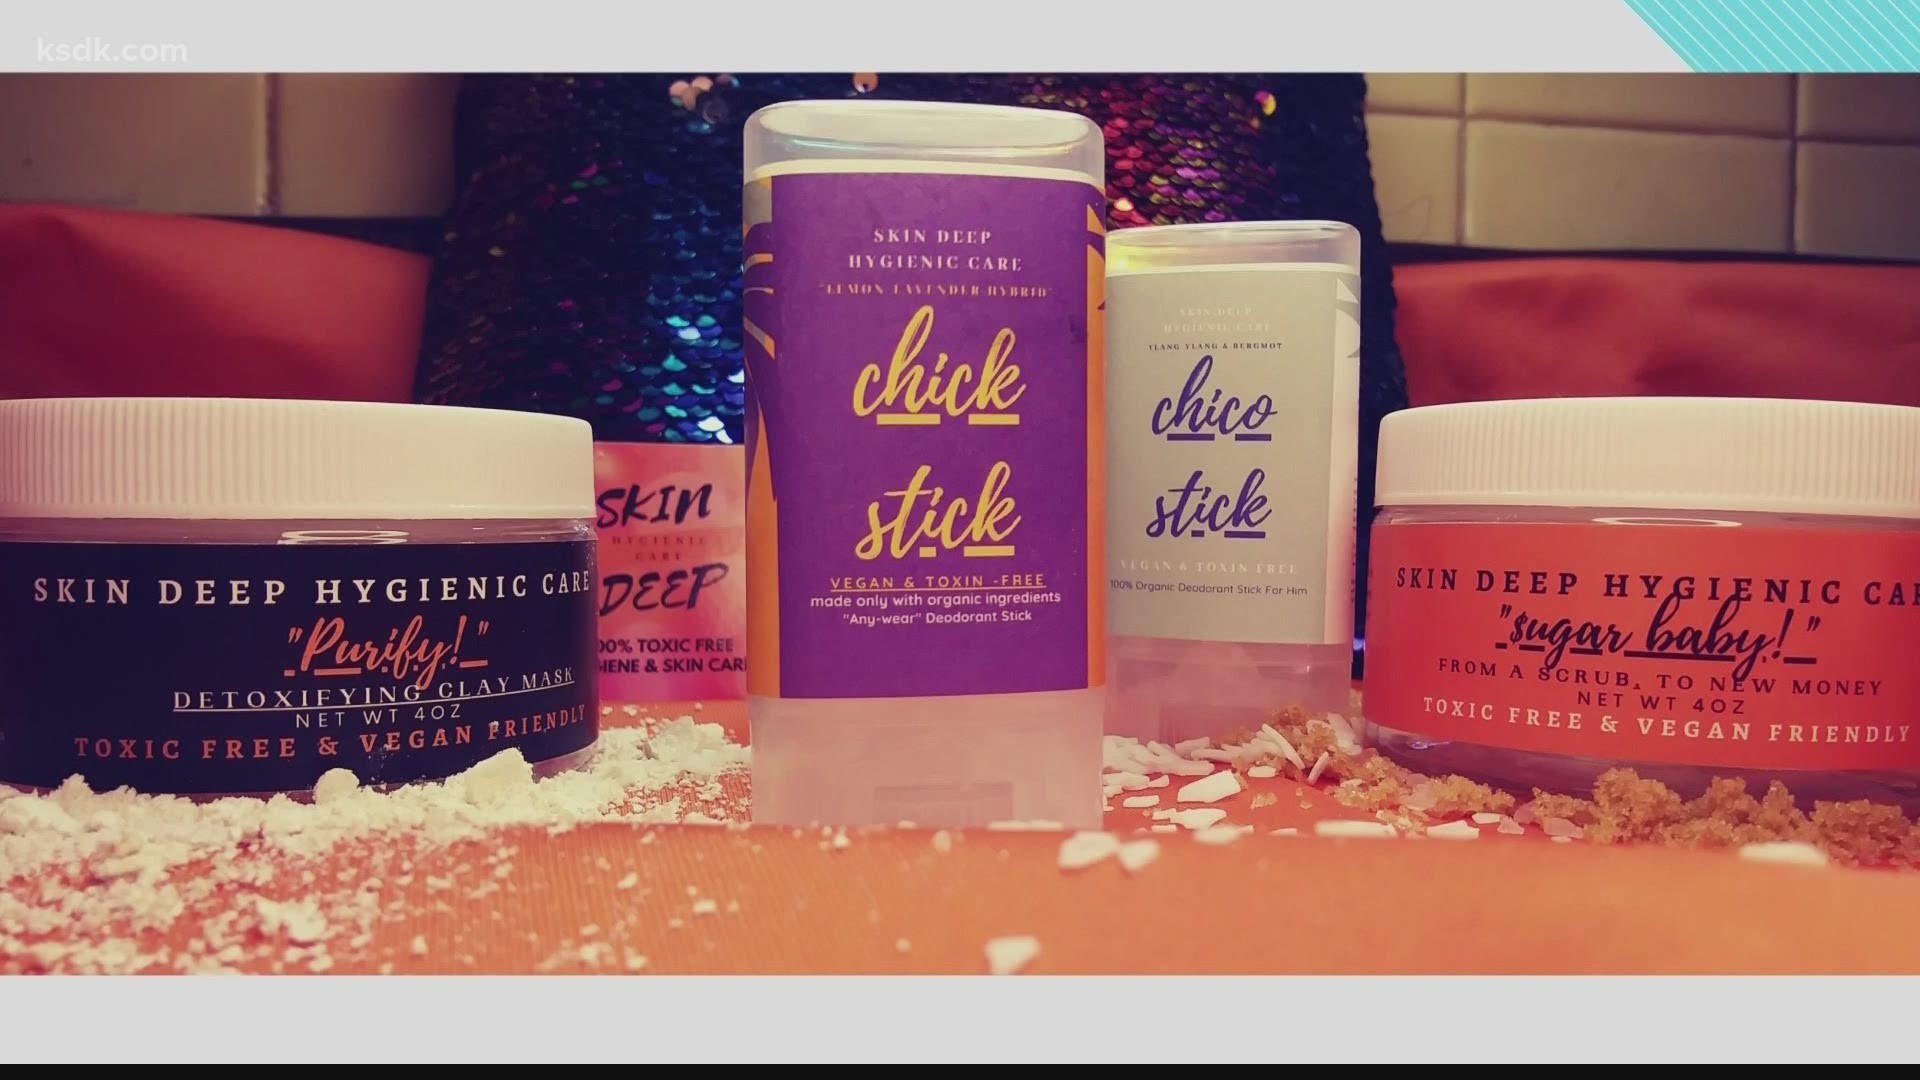 Conventional deodorants weren’t working for this St. Louis woman, so she created her own brand using natural ingredients and a detox system.